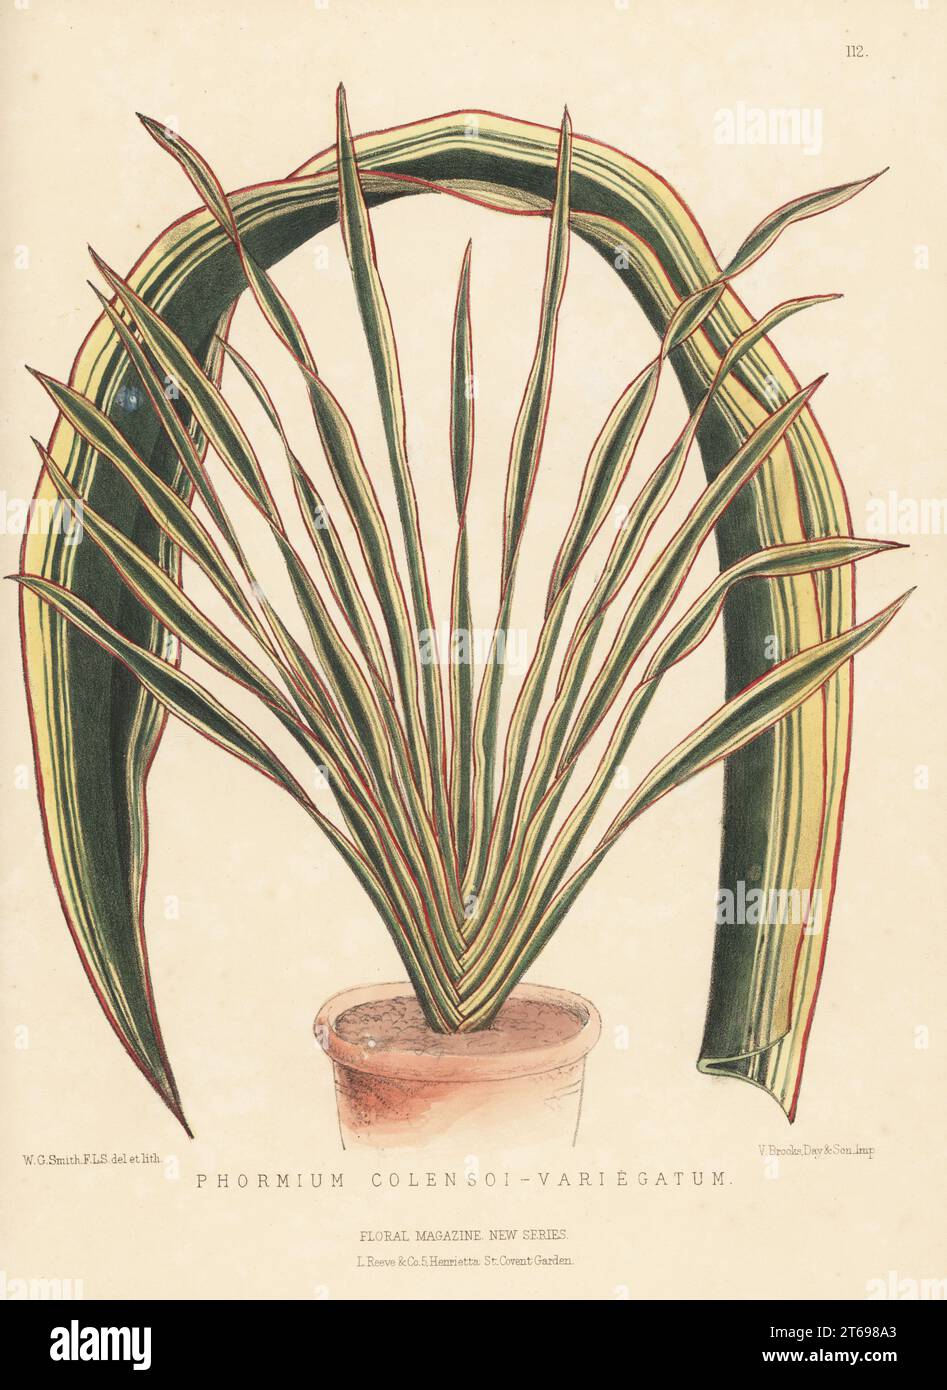 Mountain flax or wharariki, Phormium colensoi, native to New Zealand. Imported by nurseryman William Bull, King's Road, Chelsea. As Phormium colensoi-variegatum. Handcolored botanical illustration drawn and lithographed by Worthington George Smith from Henry Honywood Dombrain's Floral Magazine, New Series, Volume 3, L. Reeve, London, 1874. Lithograph printed by Vincent Brooks, Day & Son. Stock Photo